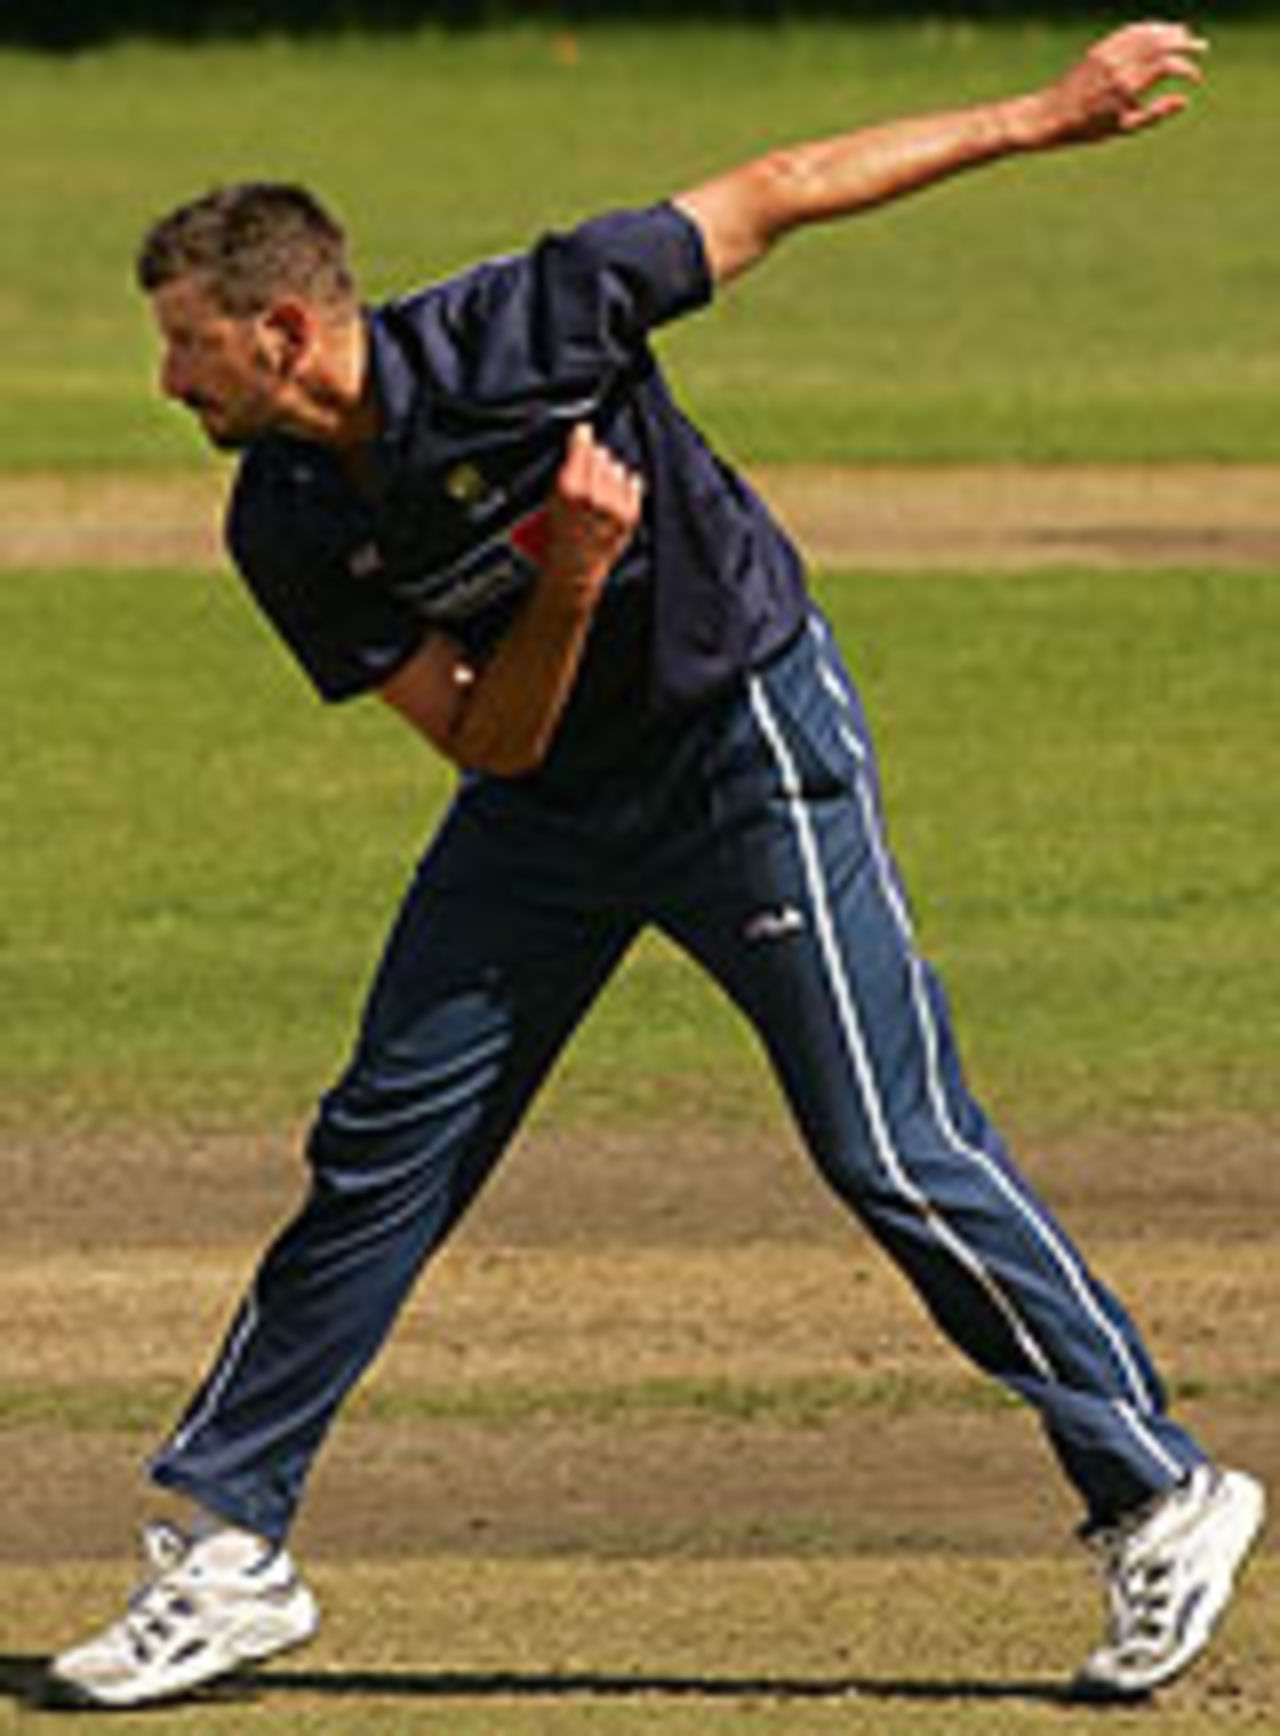 Michael Kasprowicz at a practice session, Christchurch, March 8, 2005